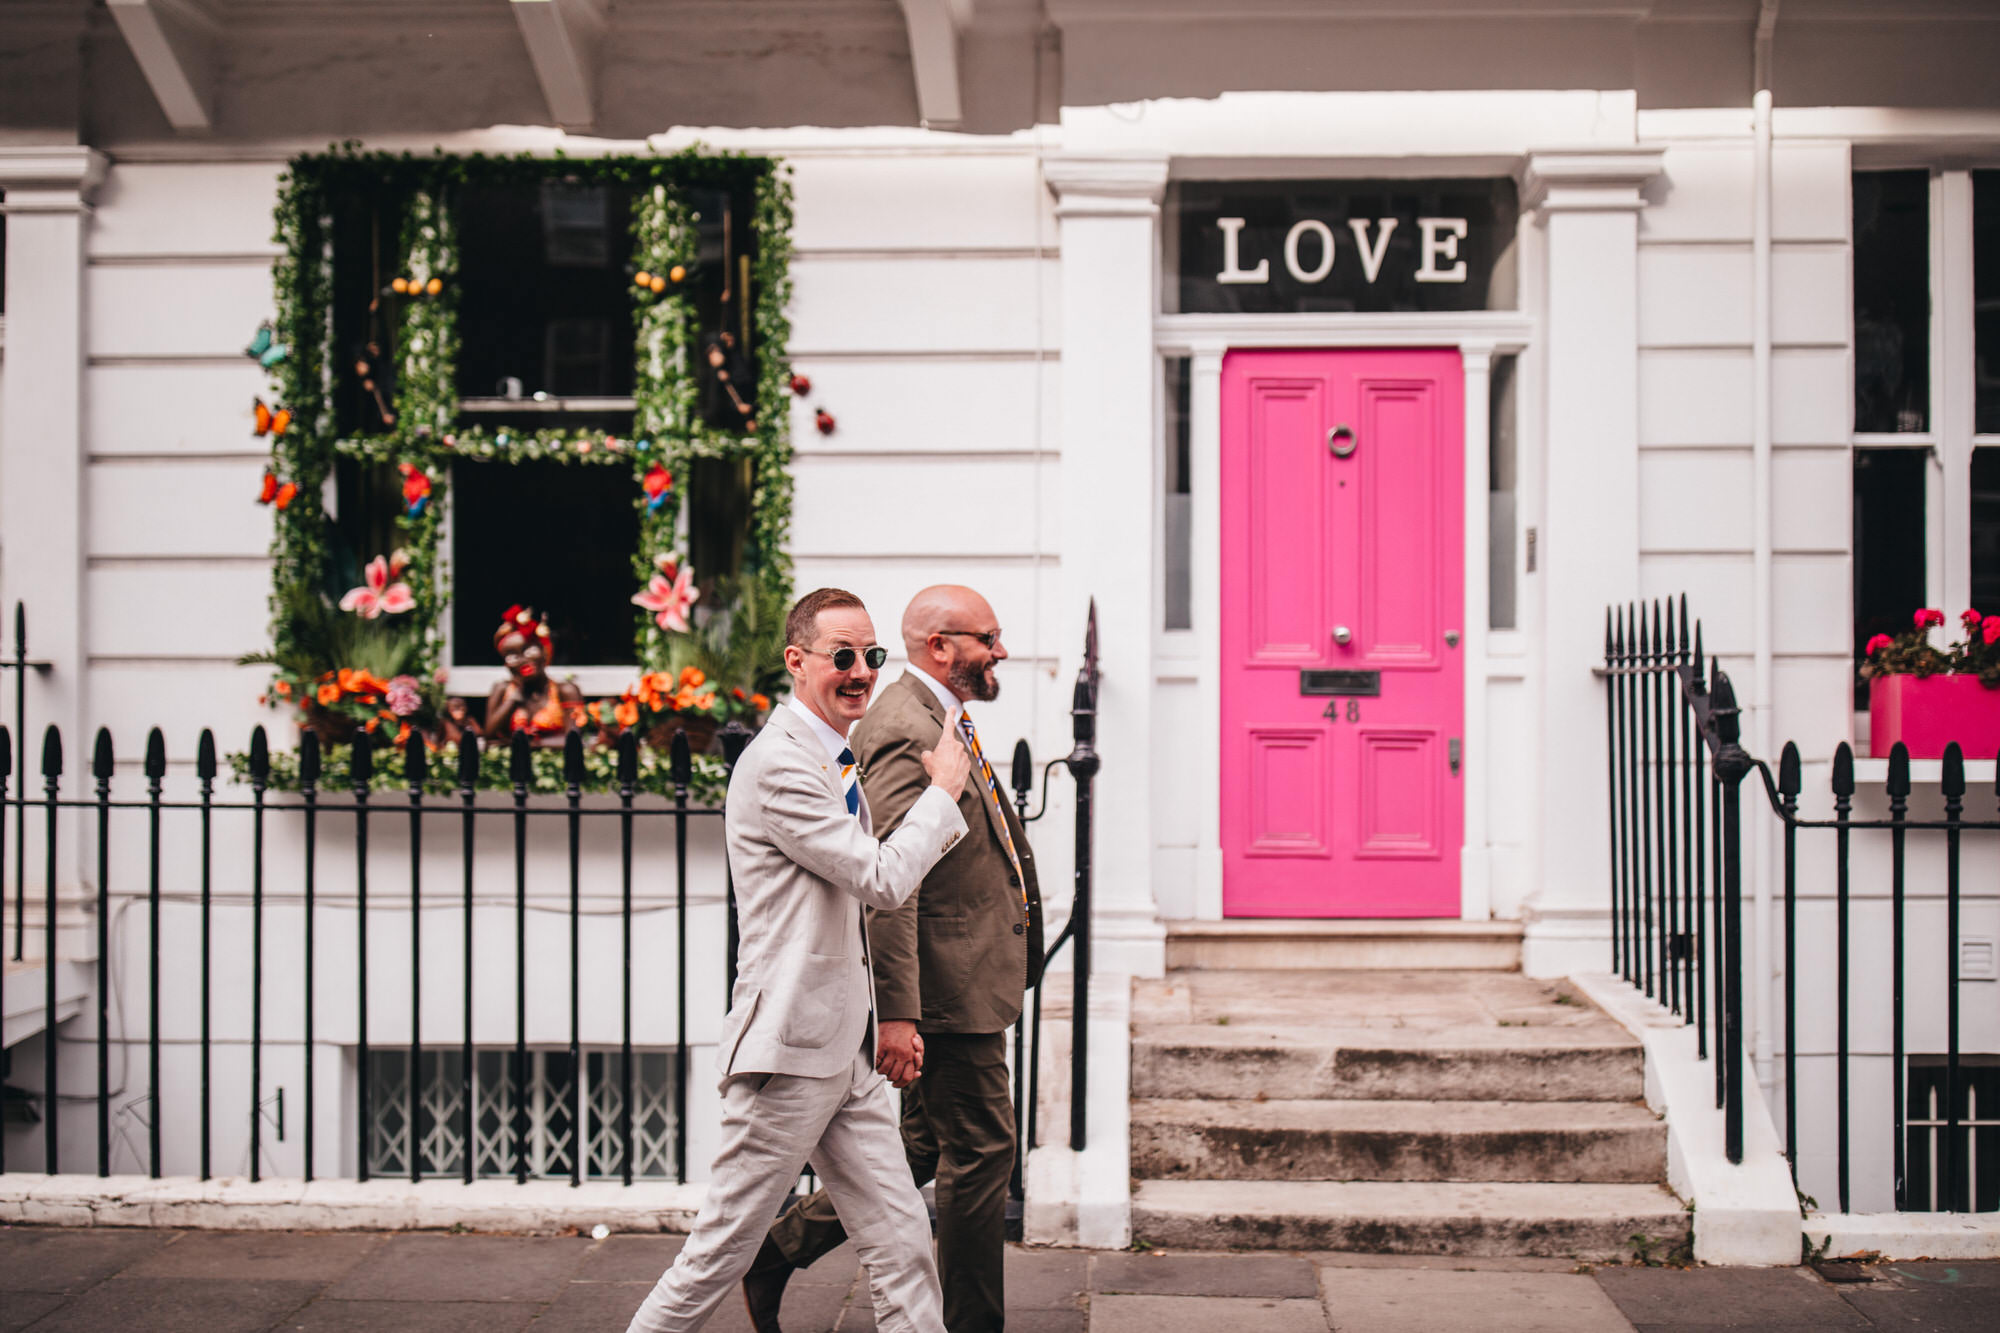 LGBTQ+ wedding, grooms walking through Chelsea together, holding hands